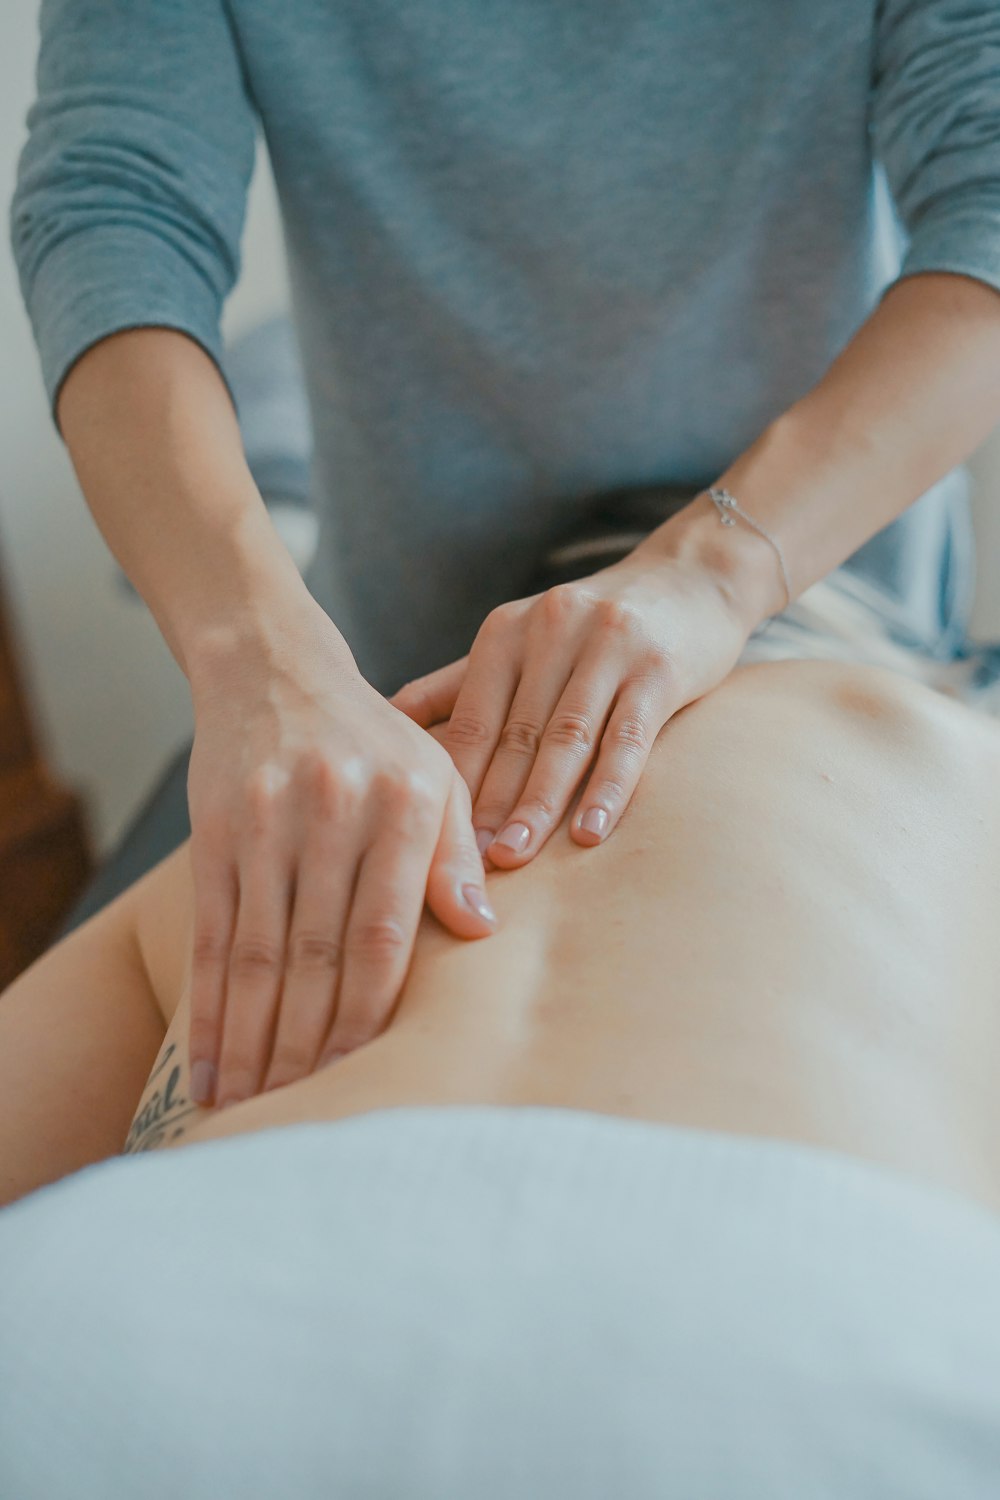 1500+ Massage Therapy Pictures | Download Free Images on Unsplash